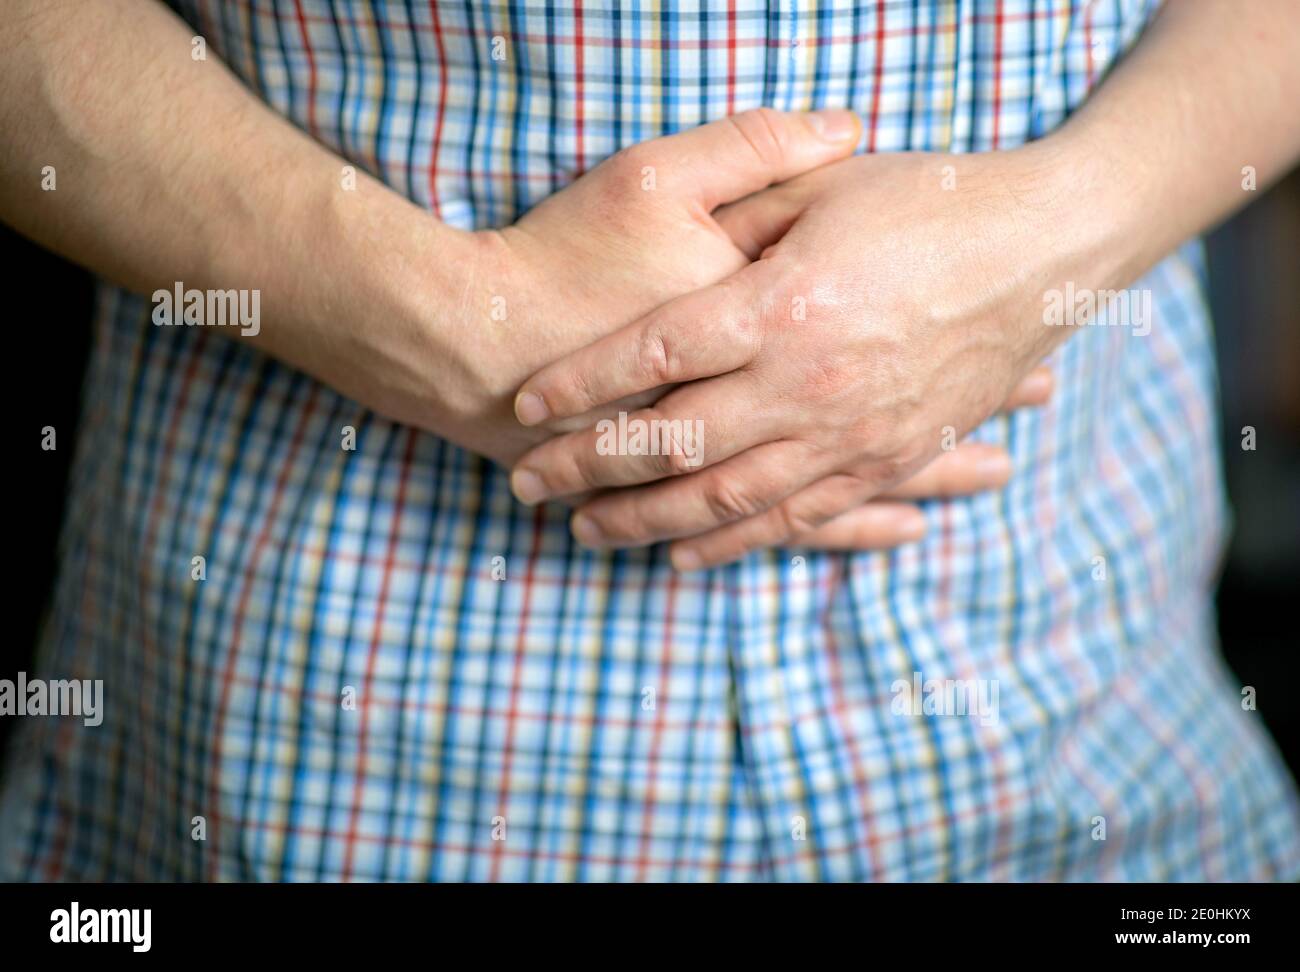 Man in a shirt holding hands on his stomach, closeup on the hands Stock Photo